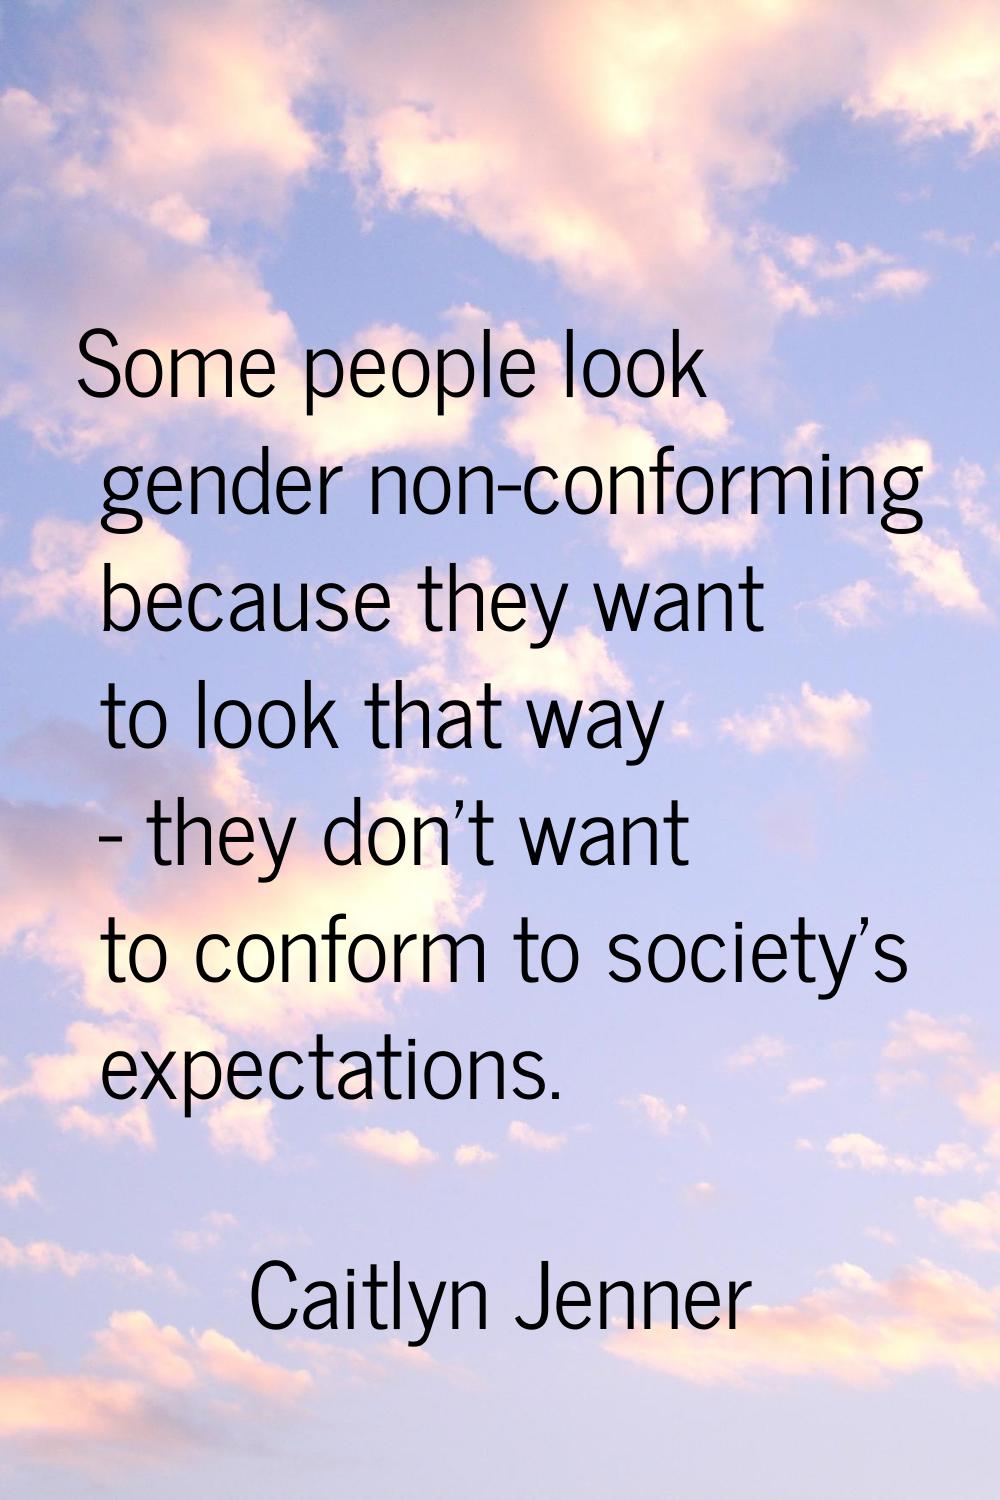 Some people look gender non-conforming because they want to look that way - they don't want to conf